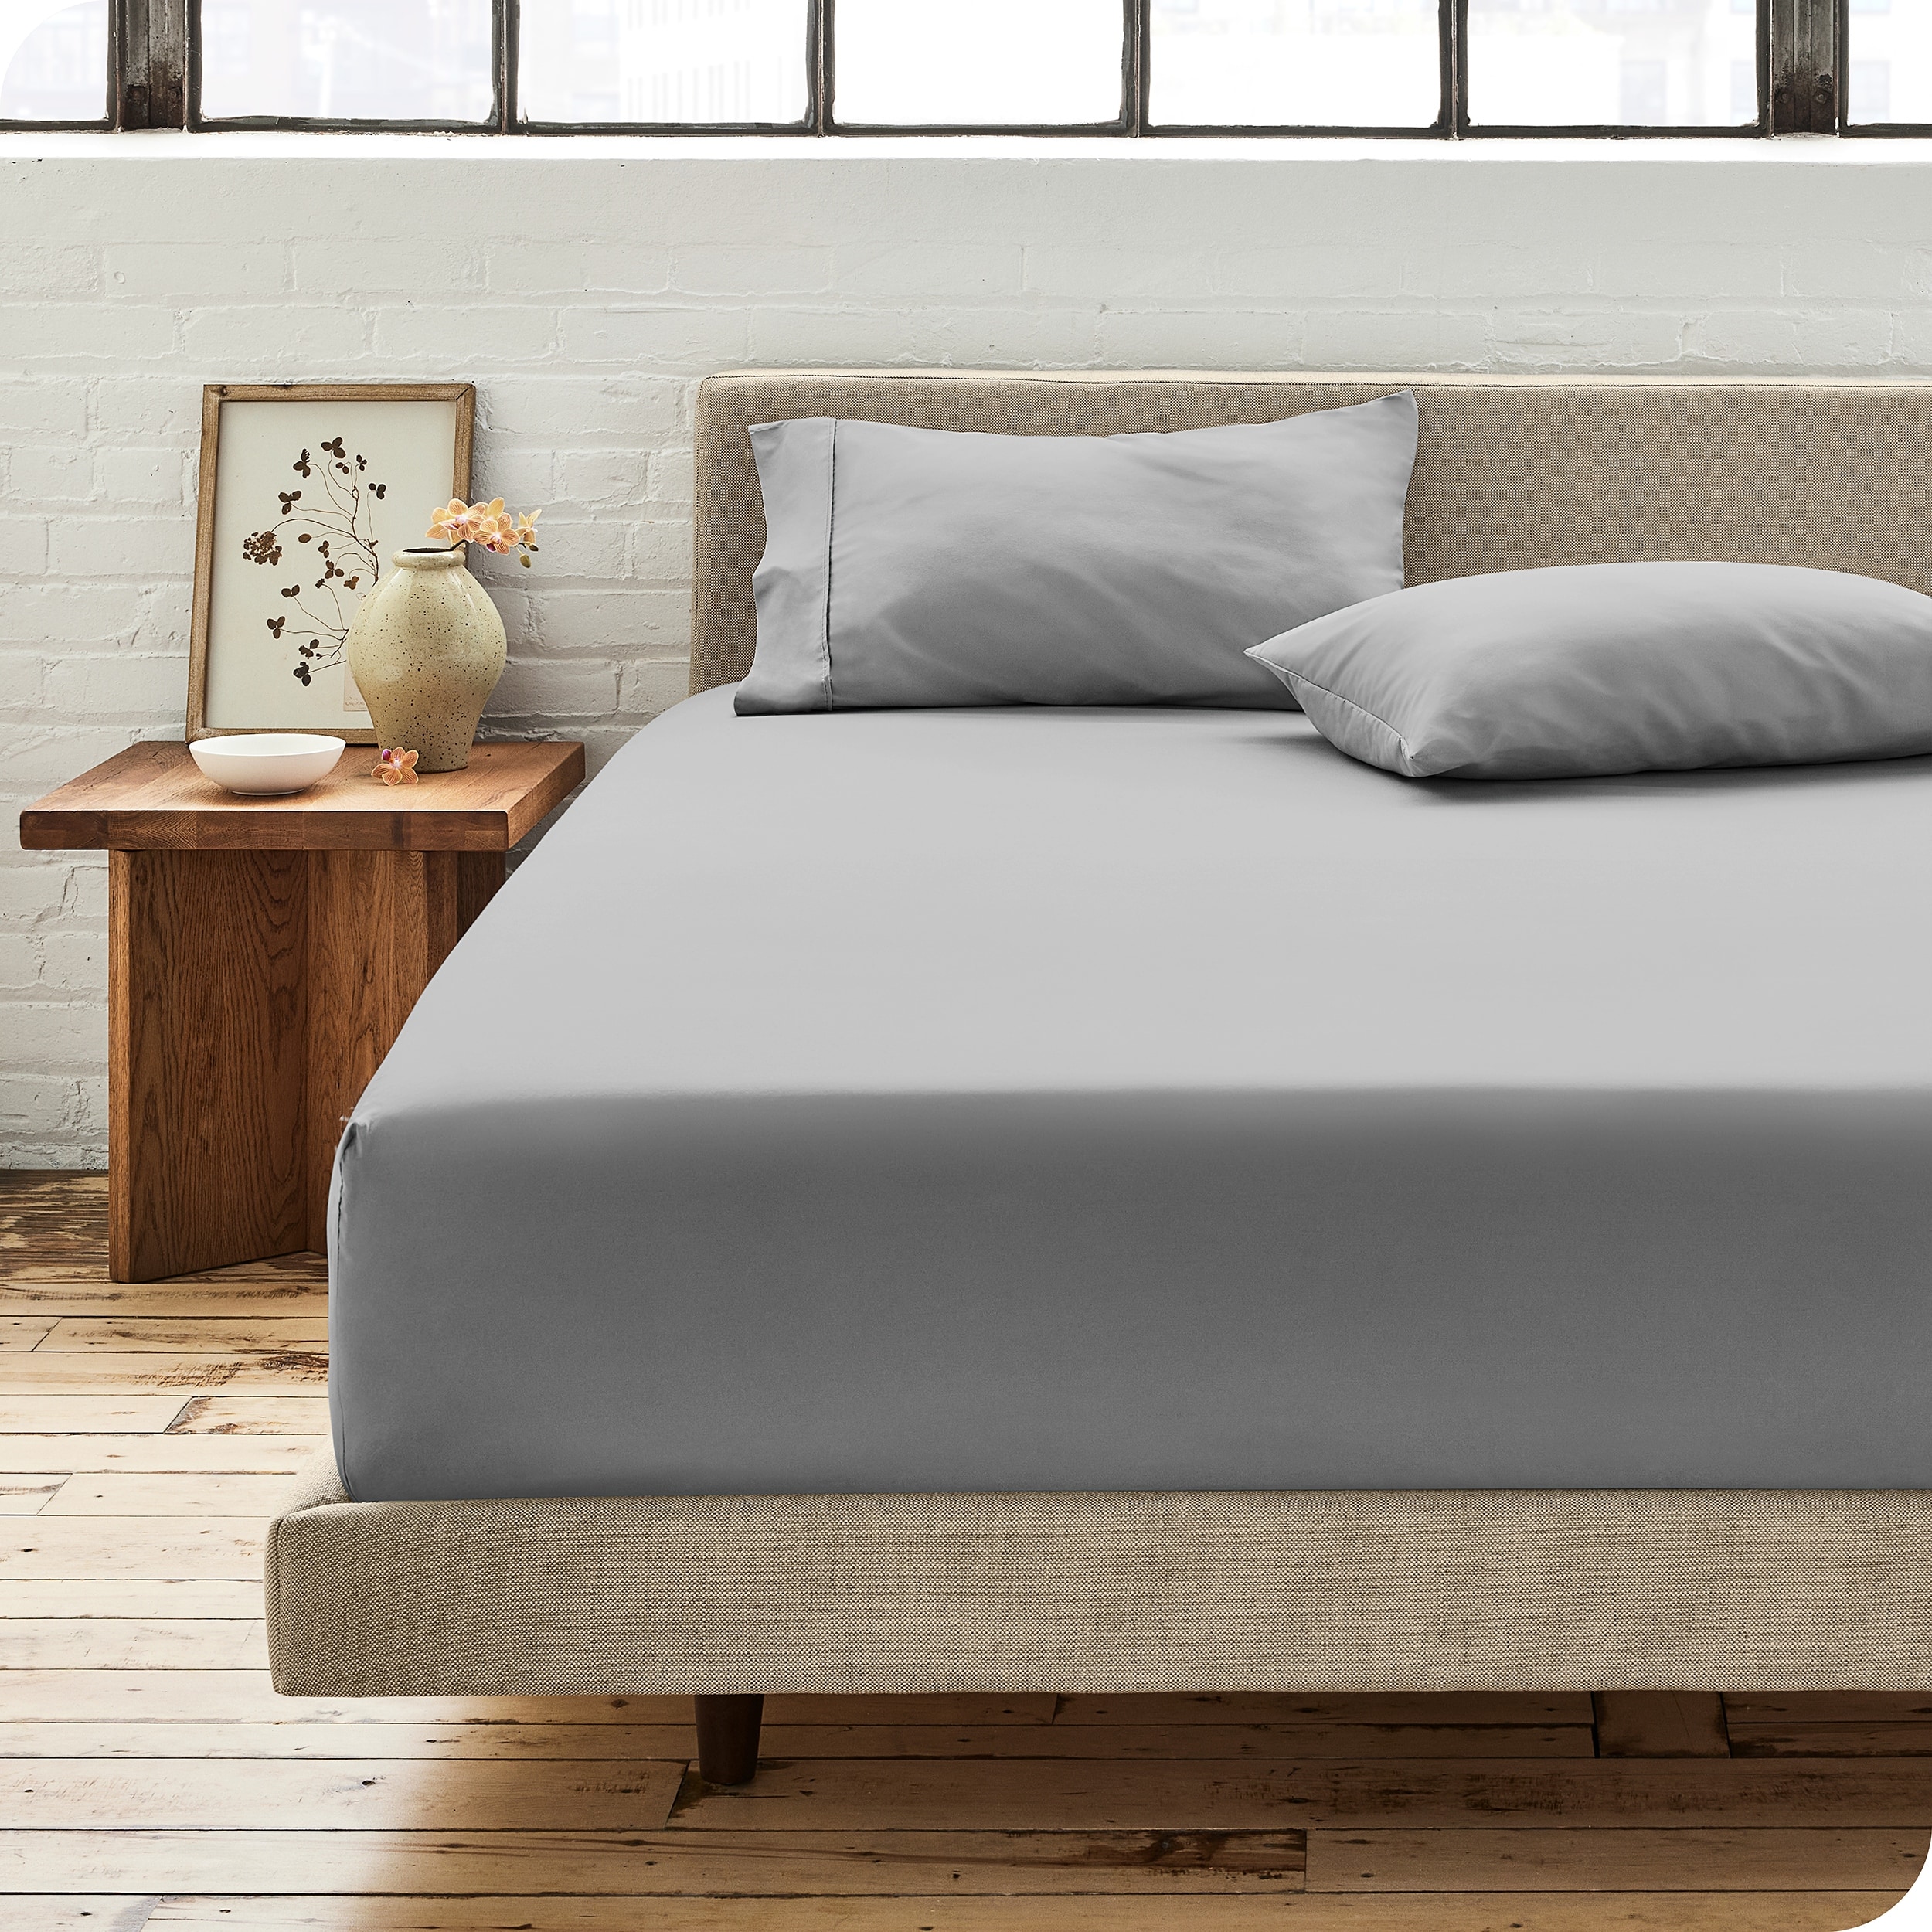 https://ak1.ostkcdn.com/images/products/is/images/direct/5cd5139c951fc76afcadda6ced174094d4e89c1a/Bare-Home-Cotton-Fitted-Bottom-Sheet---Crisp-Percale-Weave---Lightweight-%26-Breathable.jpg